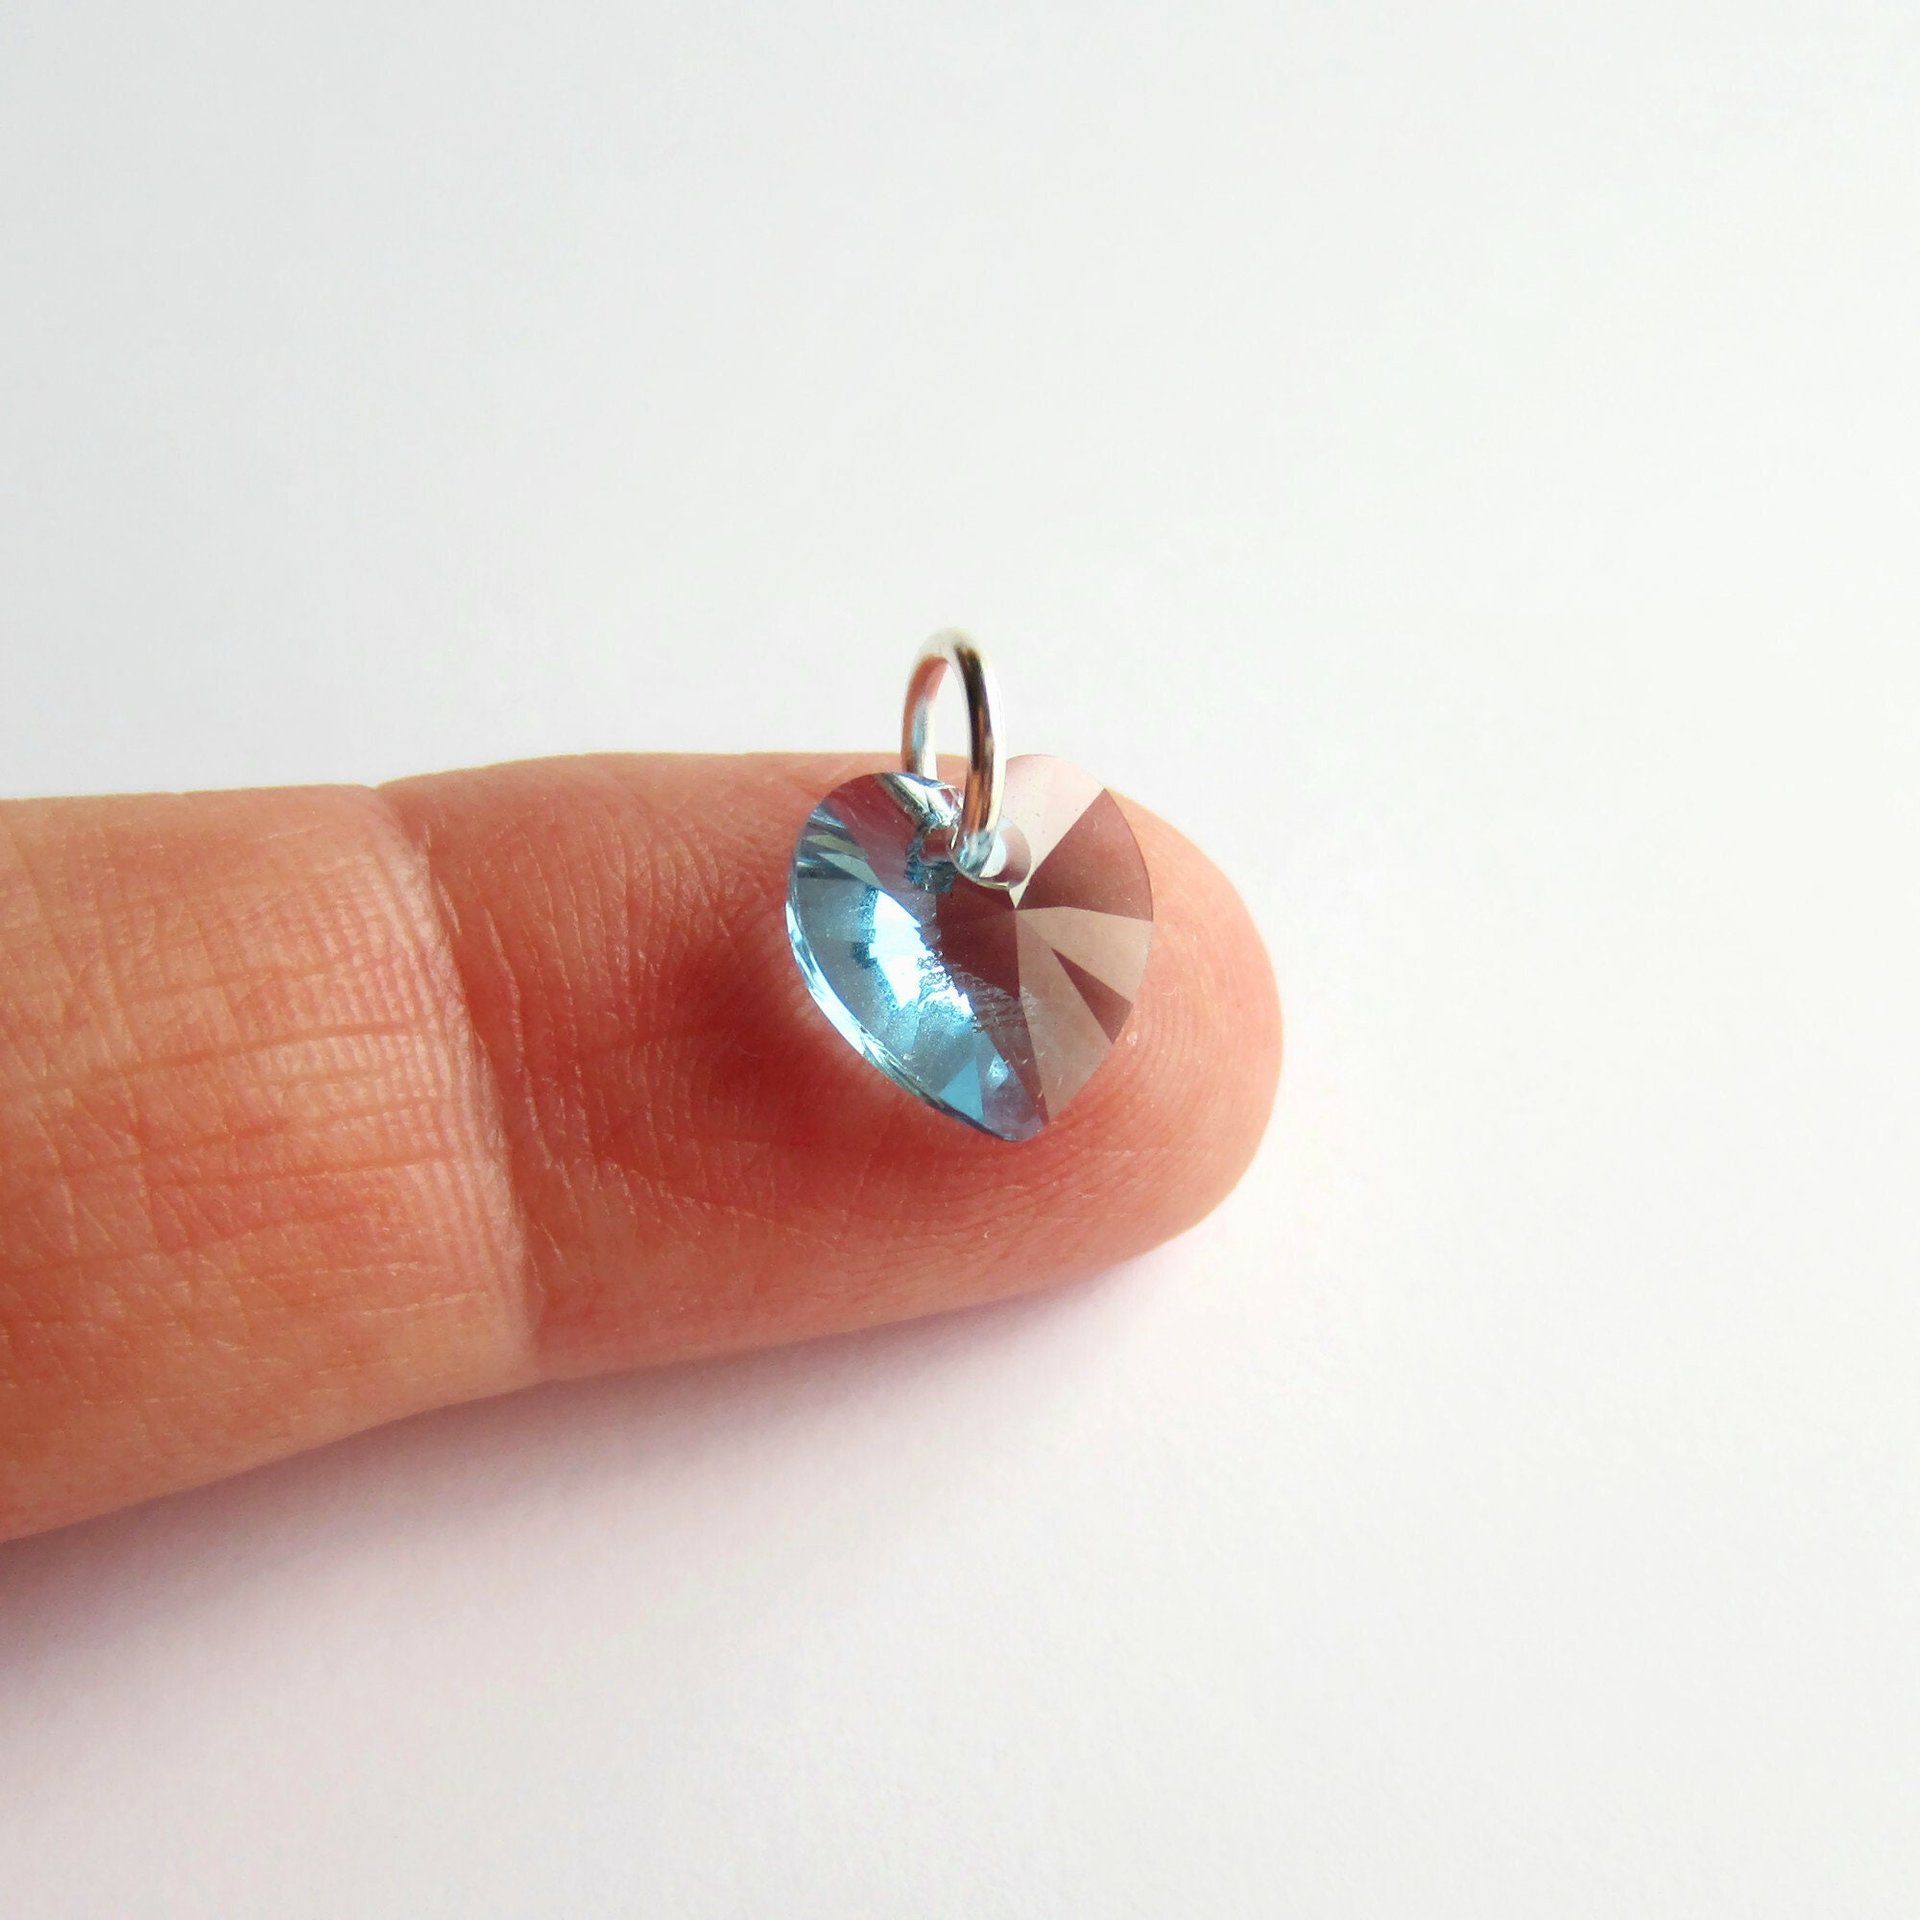 Small Pale Blue Crystal Heart Charm ~ Handmade by The Tiny Tree Frog Jewellery